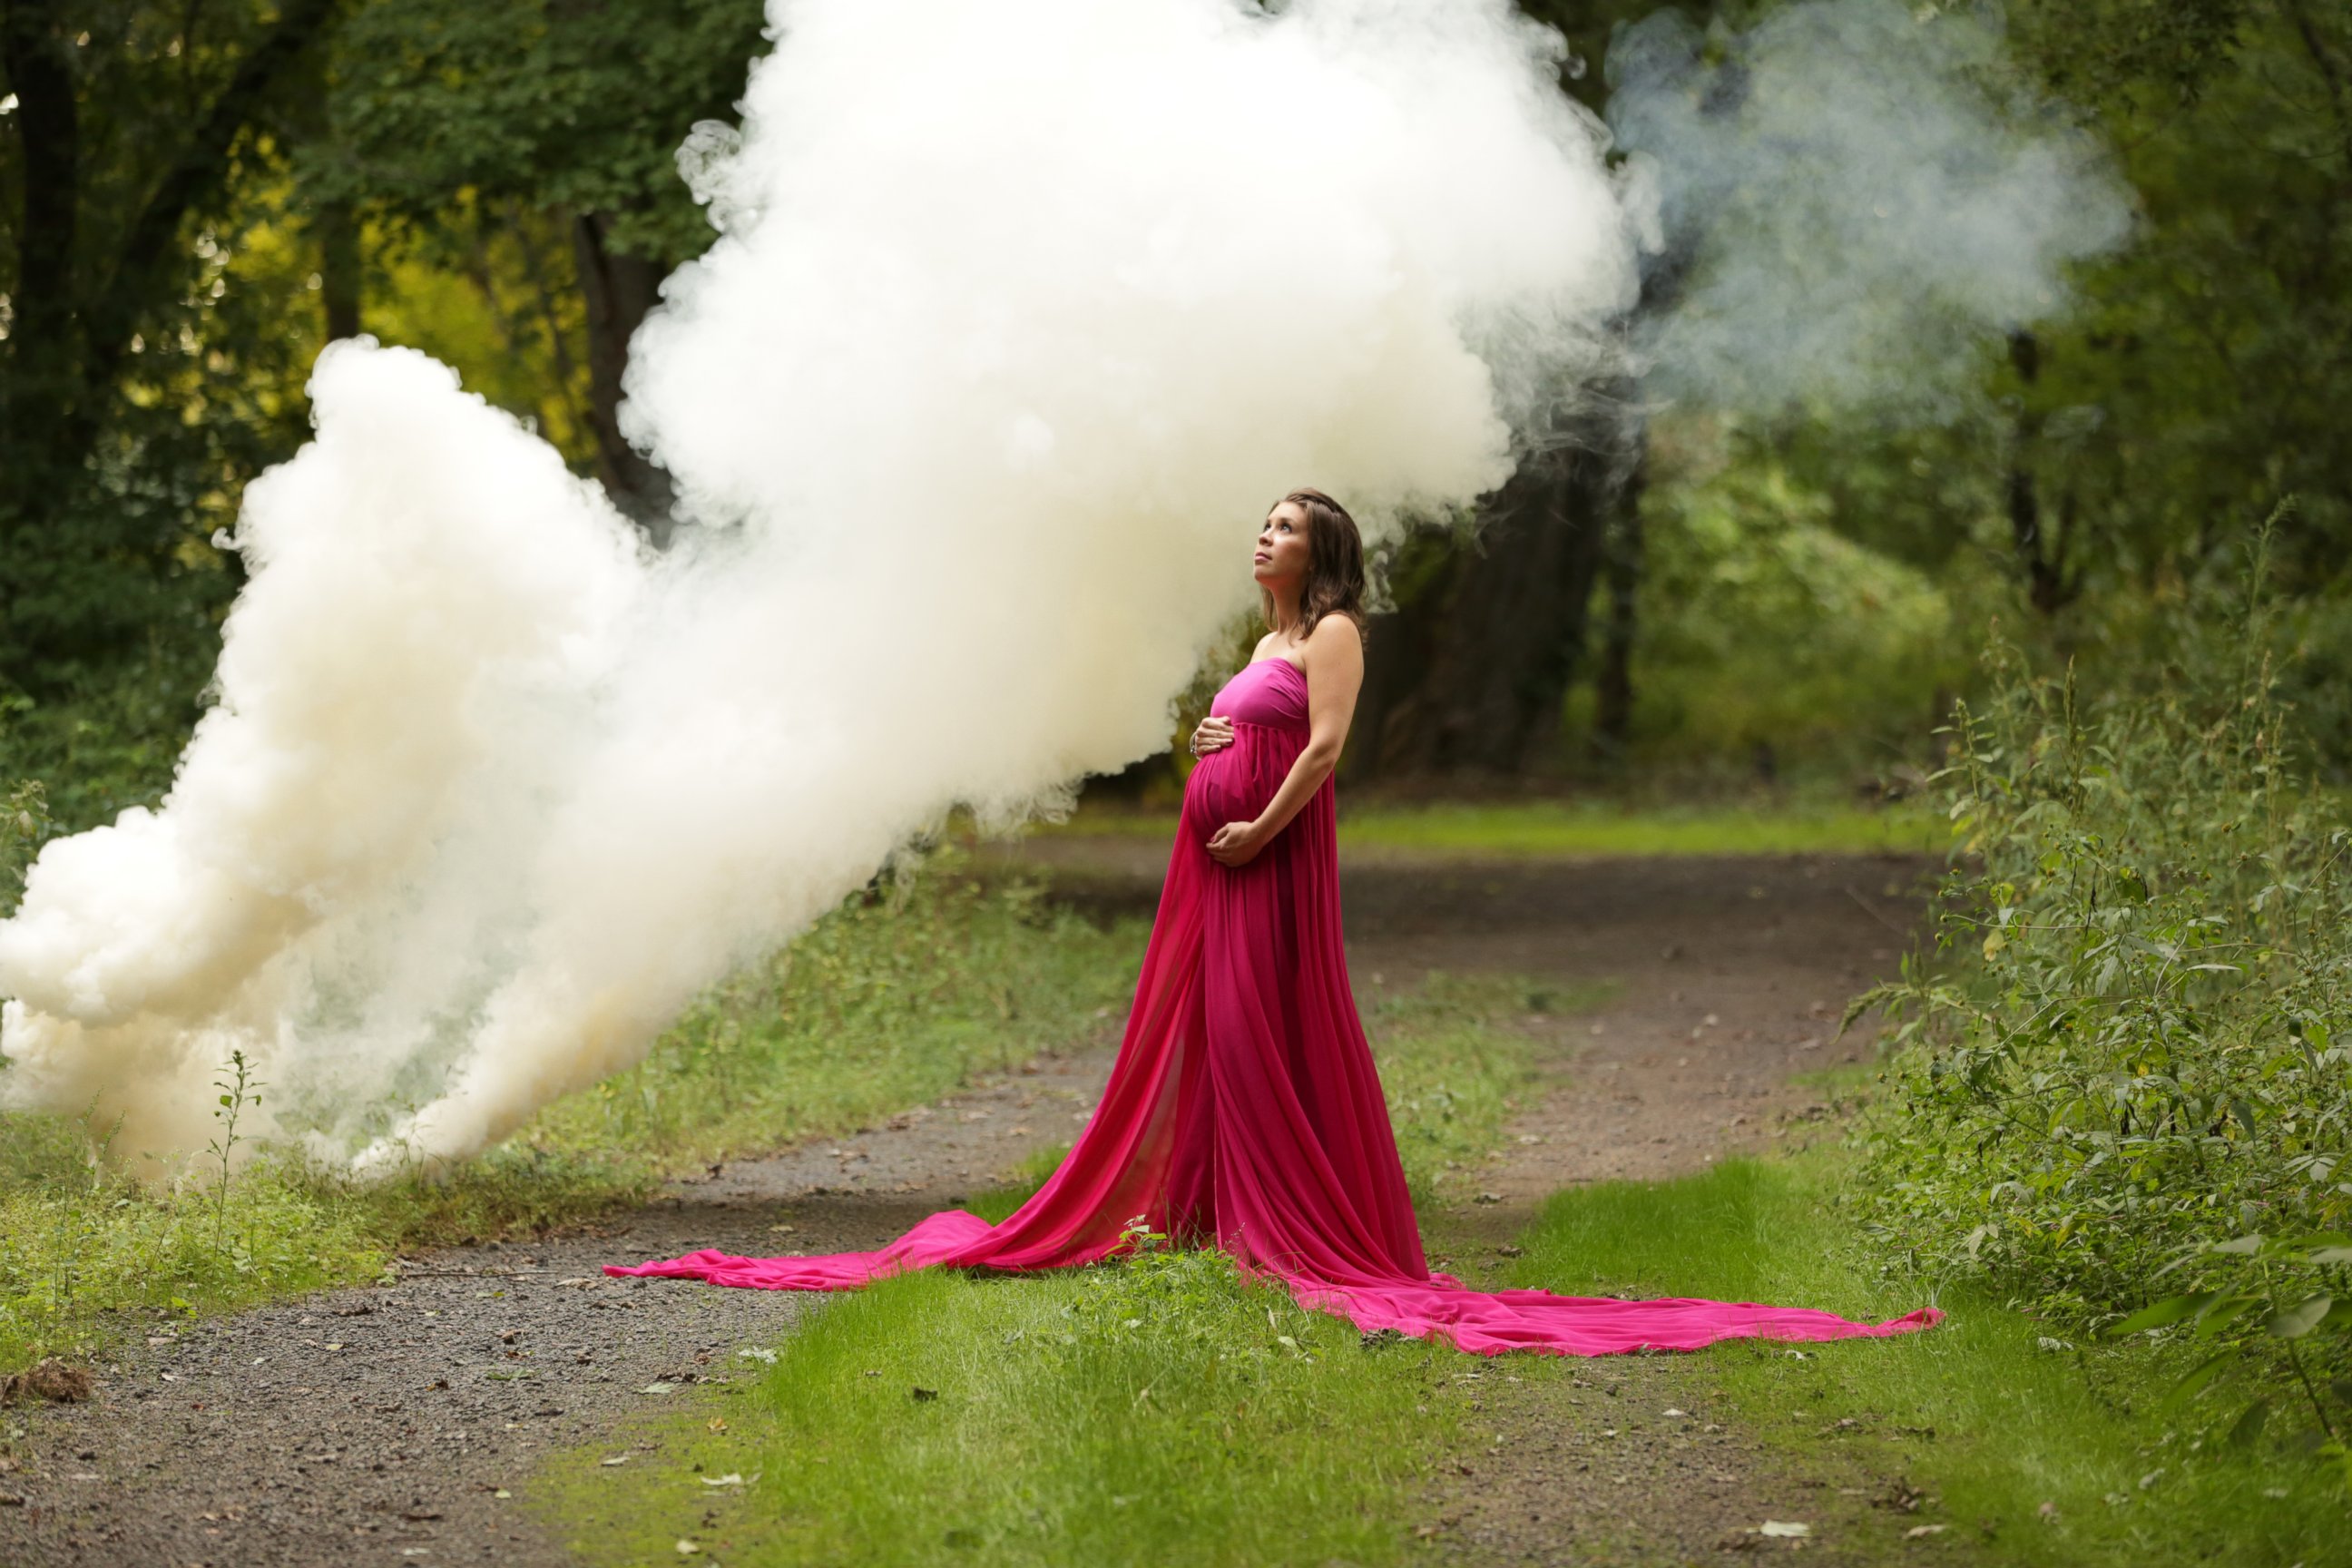 PHOTO: Jessica Mahoney celebrated getting pregnant after six miscarriages in an inspiring rainbow-themed maternity photo shoot.